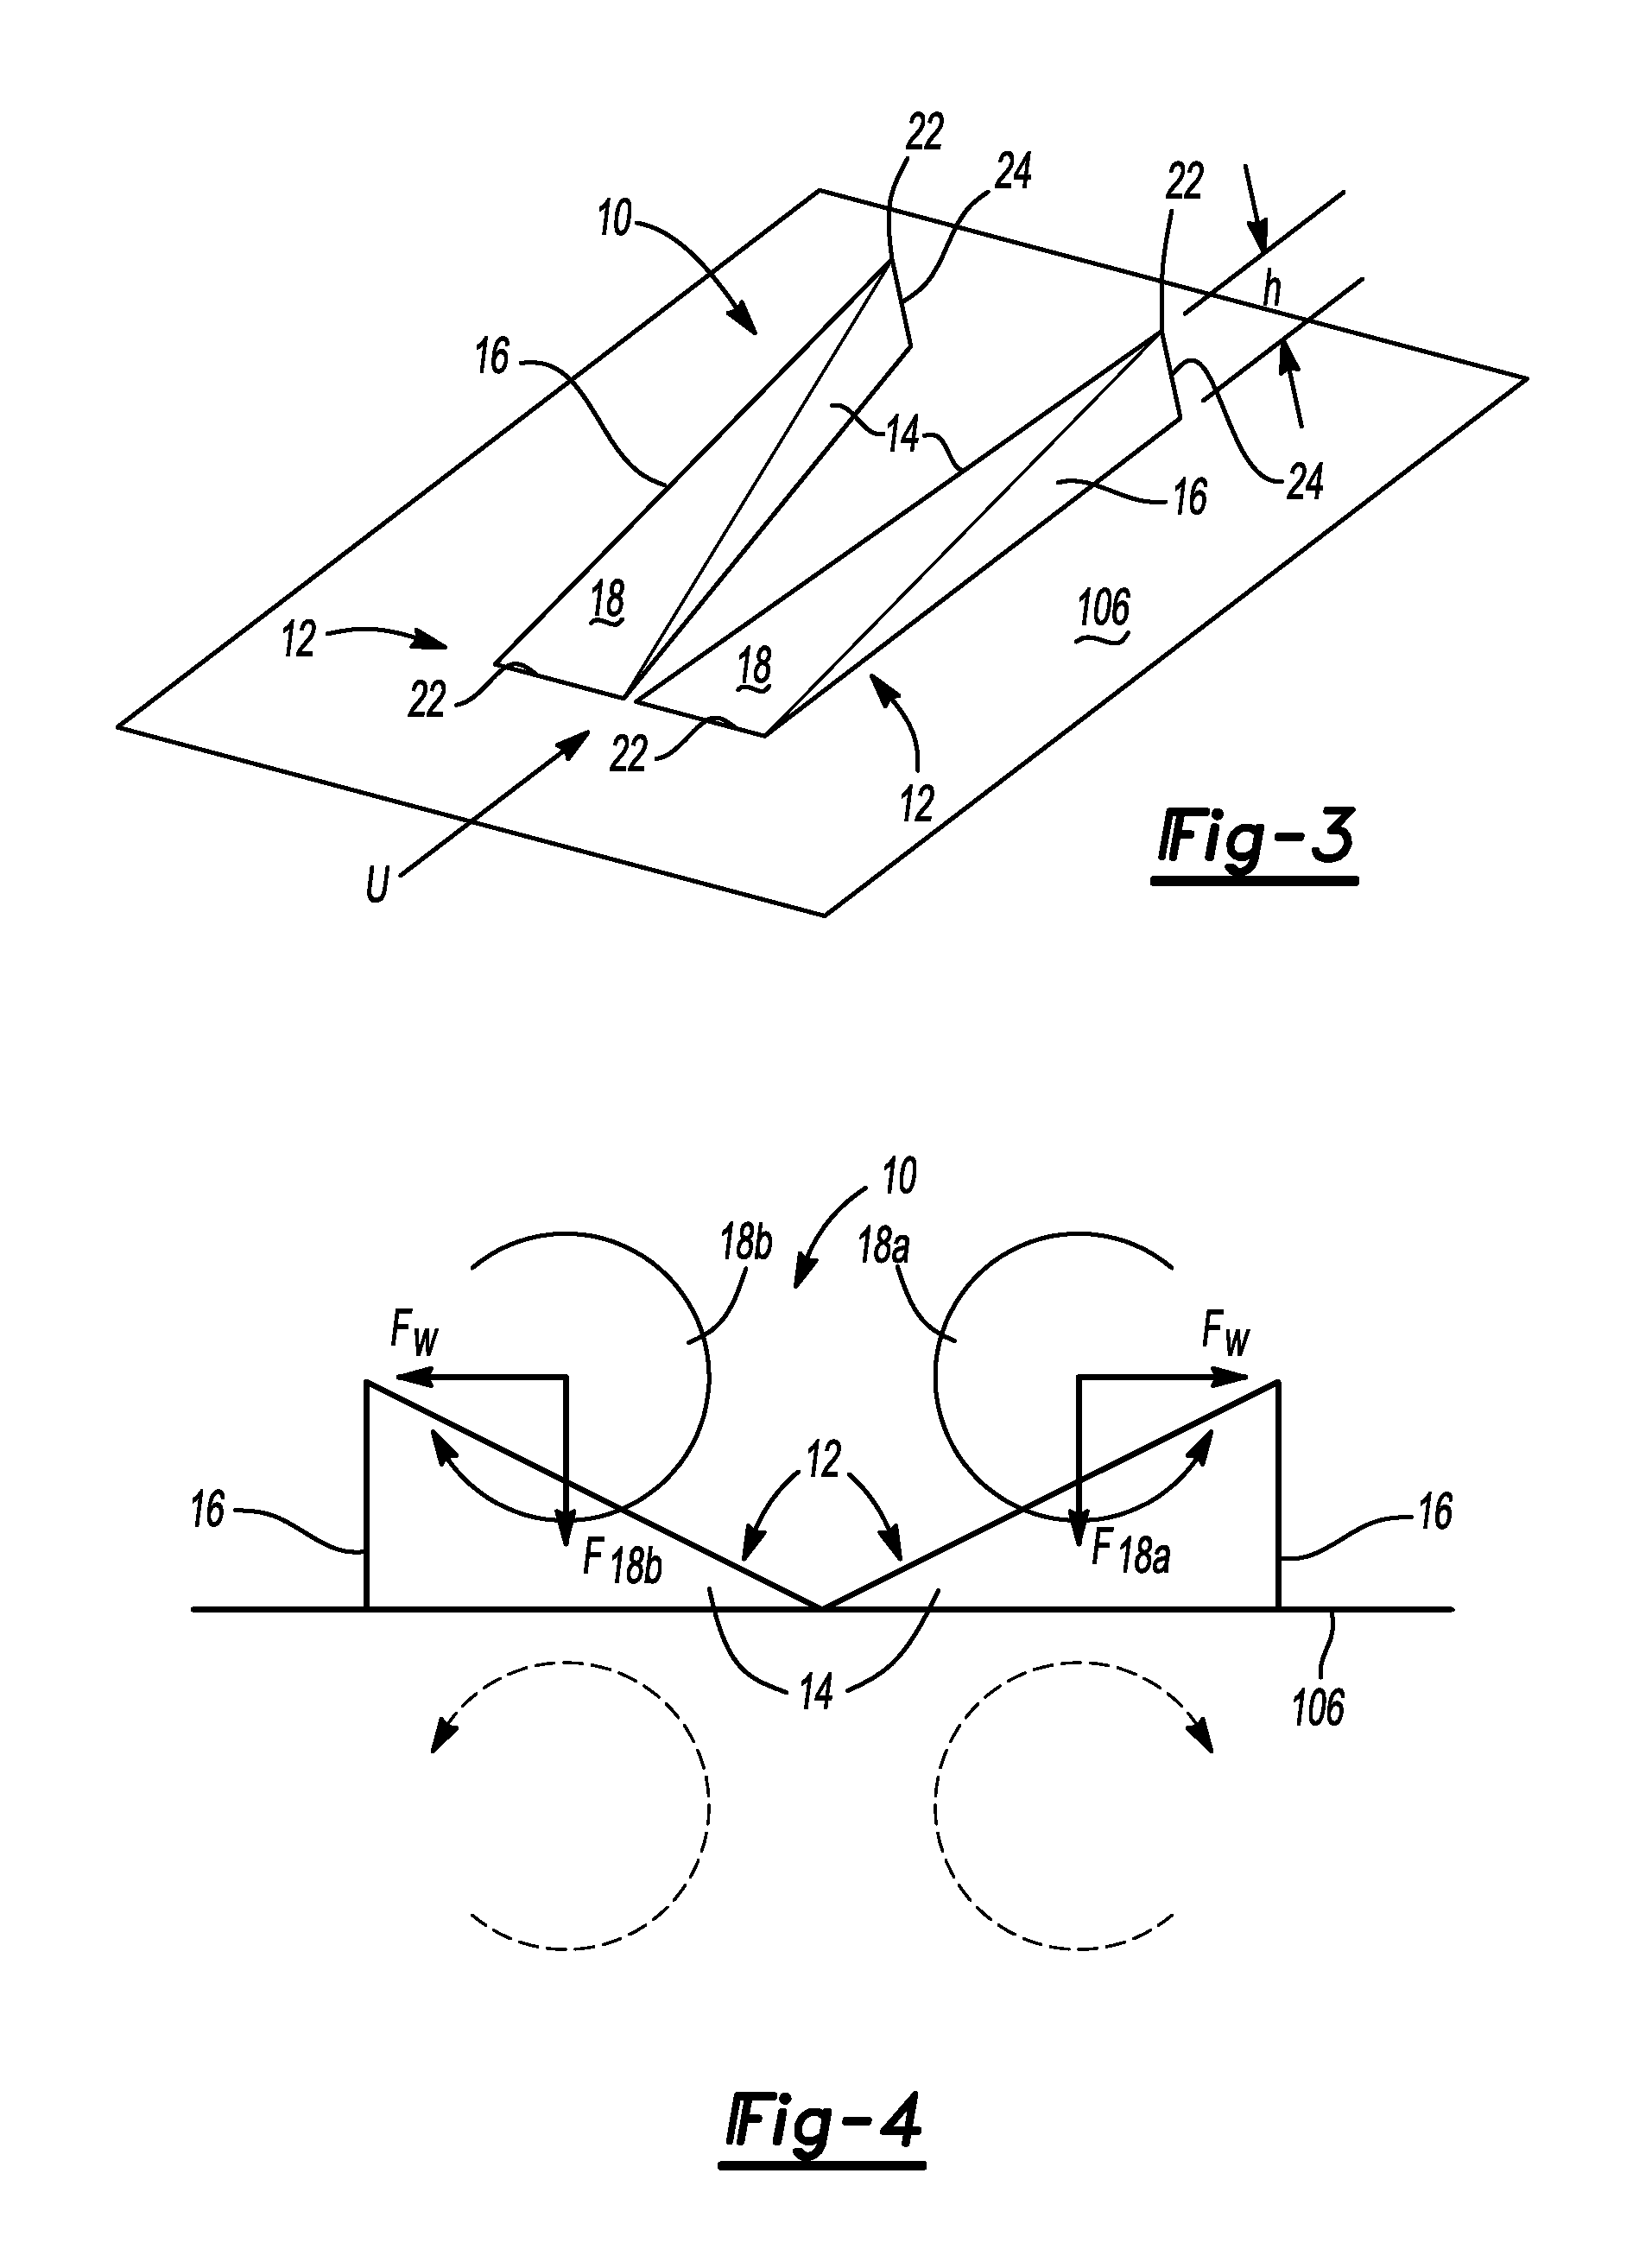 Passive boundary layer control elements